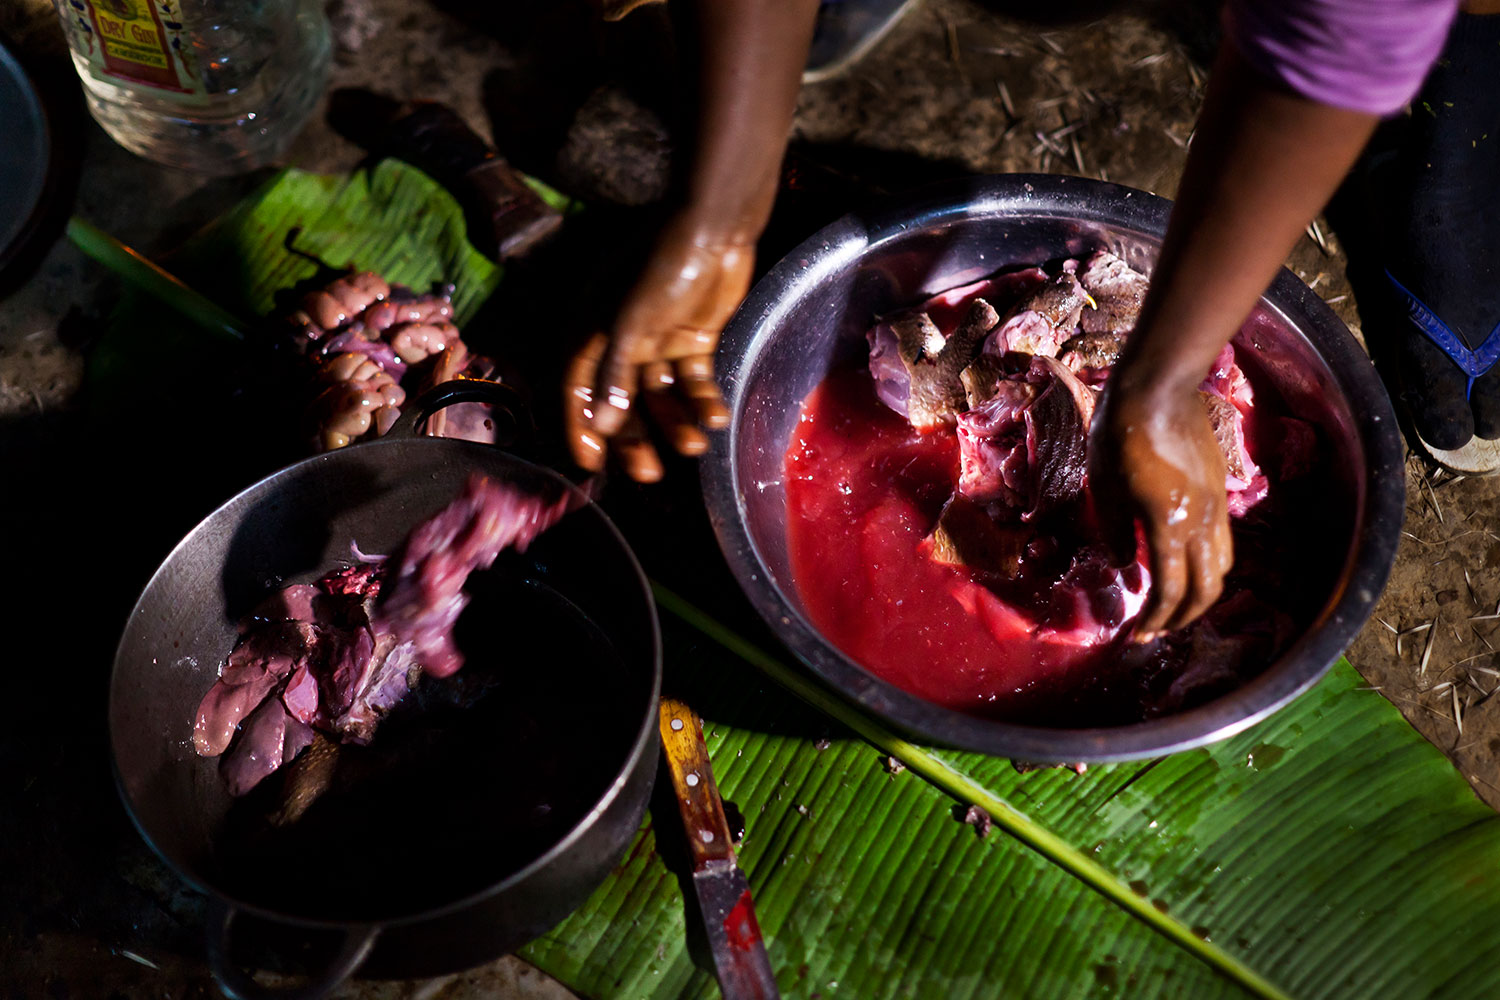 A woman prepares a porcupine for the pot in a small Cameroonian village close to to Nyabissam on July 27, 2011. Any cuts on her hands or arms could invite disease during the bloody preparation process, a fact that many consumers of bushmeat are unaware of.